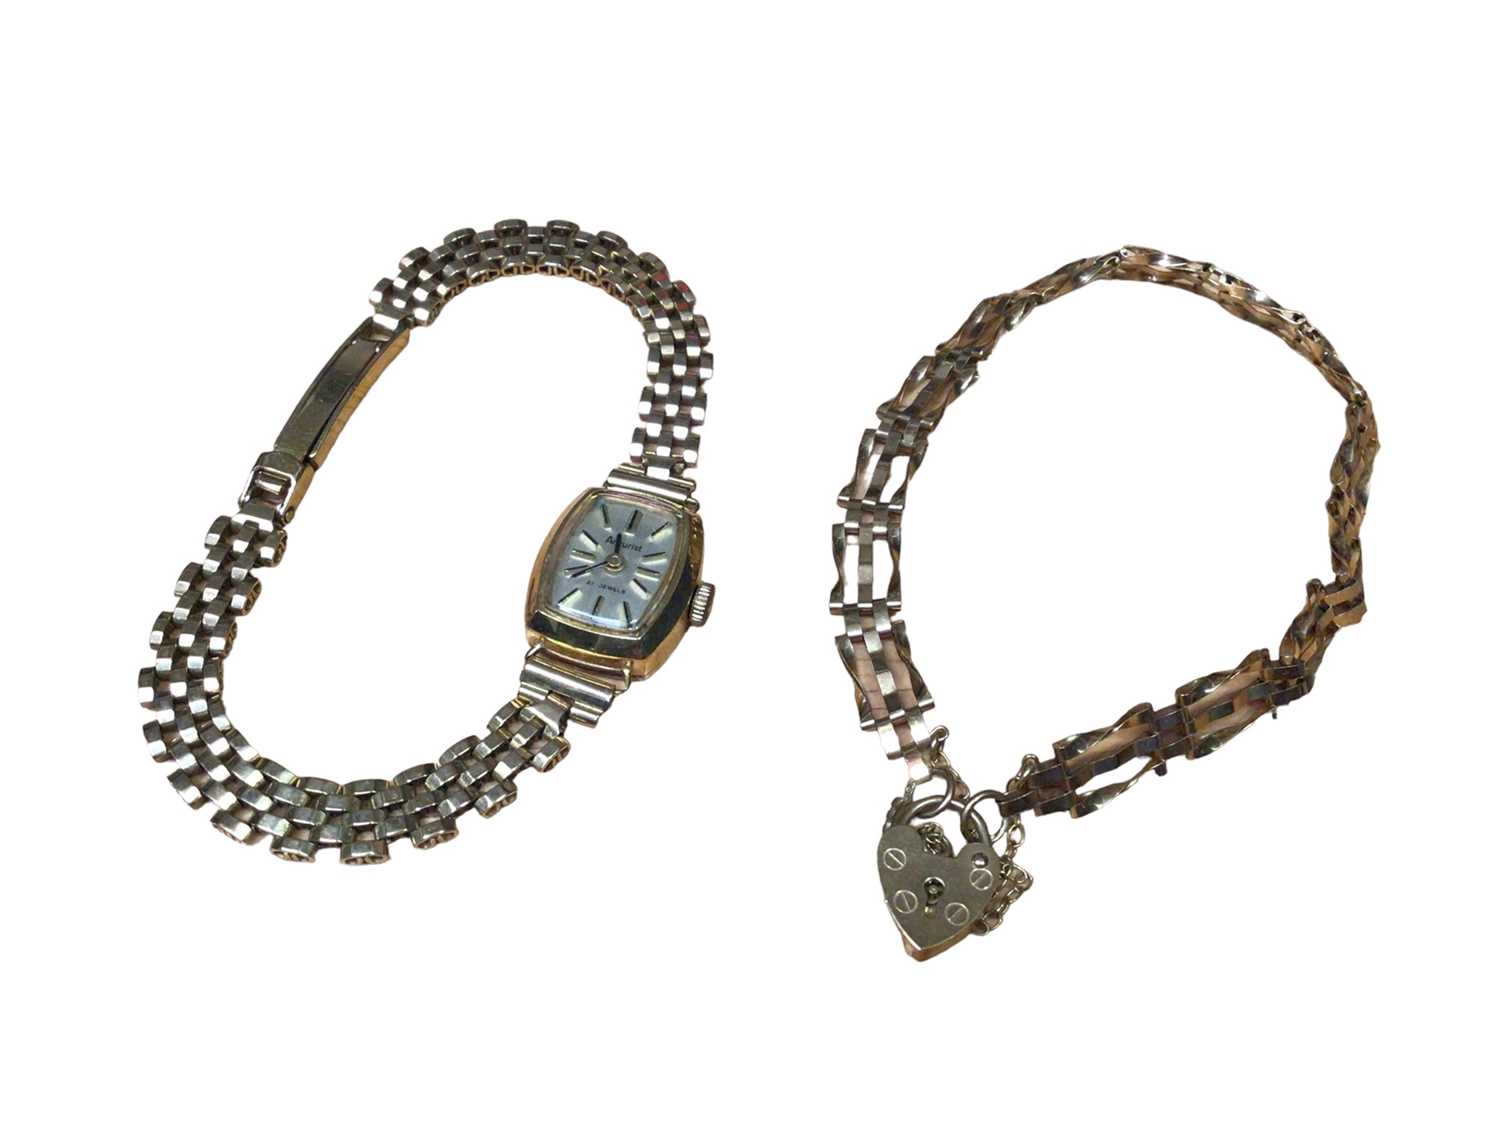 Lot 149 - Vintage 9ct gold Accurist wristwatch on 9ct gold bracelet, together with a 9ct gold gate bracelet with padlock clasp (2)